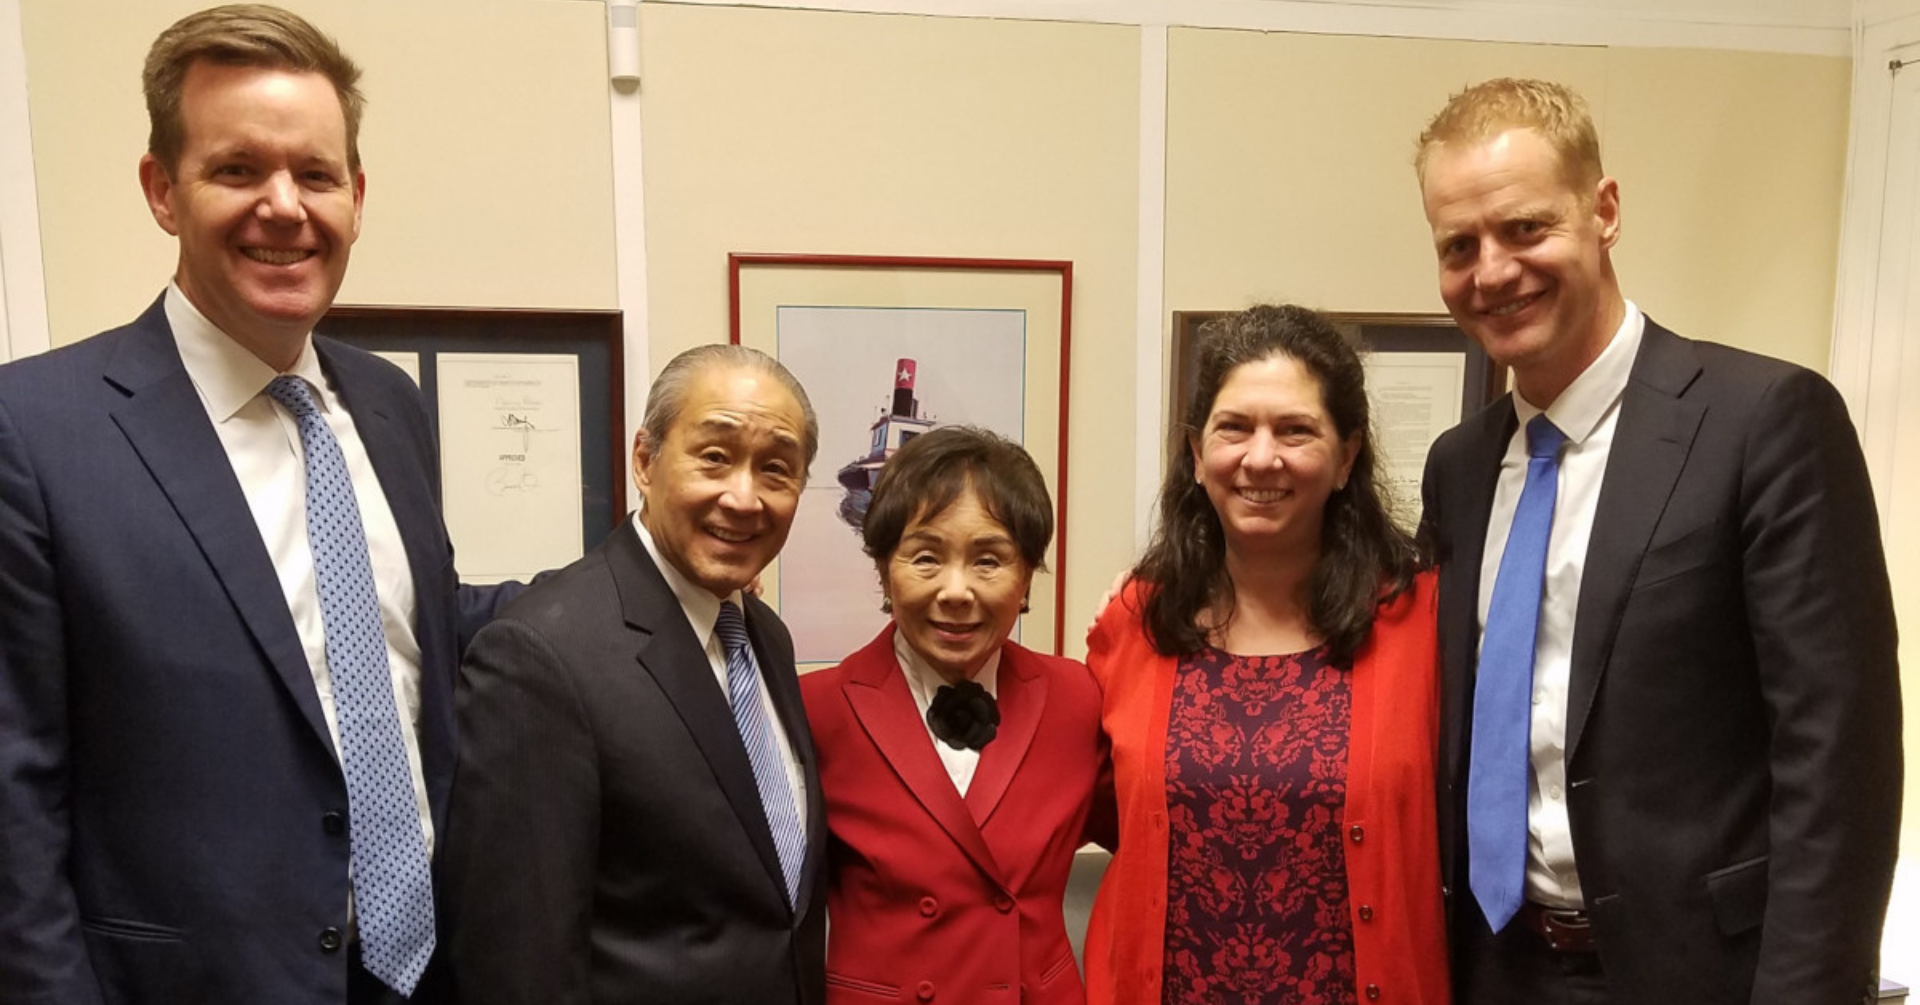 Introductory image: Group Photo at Representative Matsui's Office